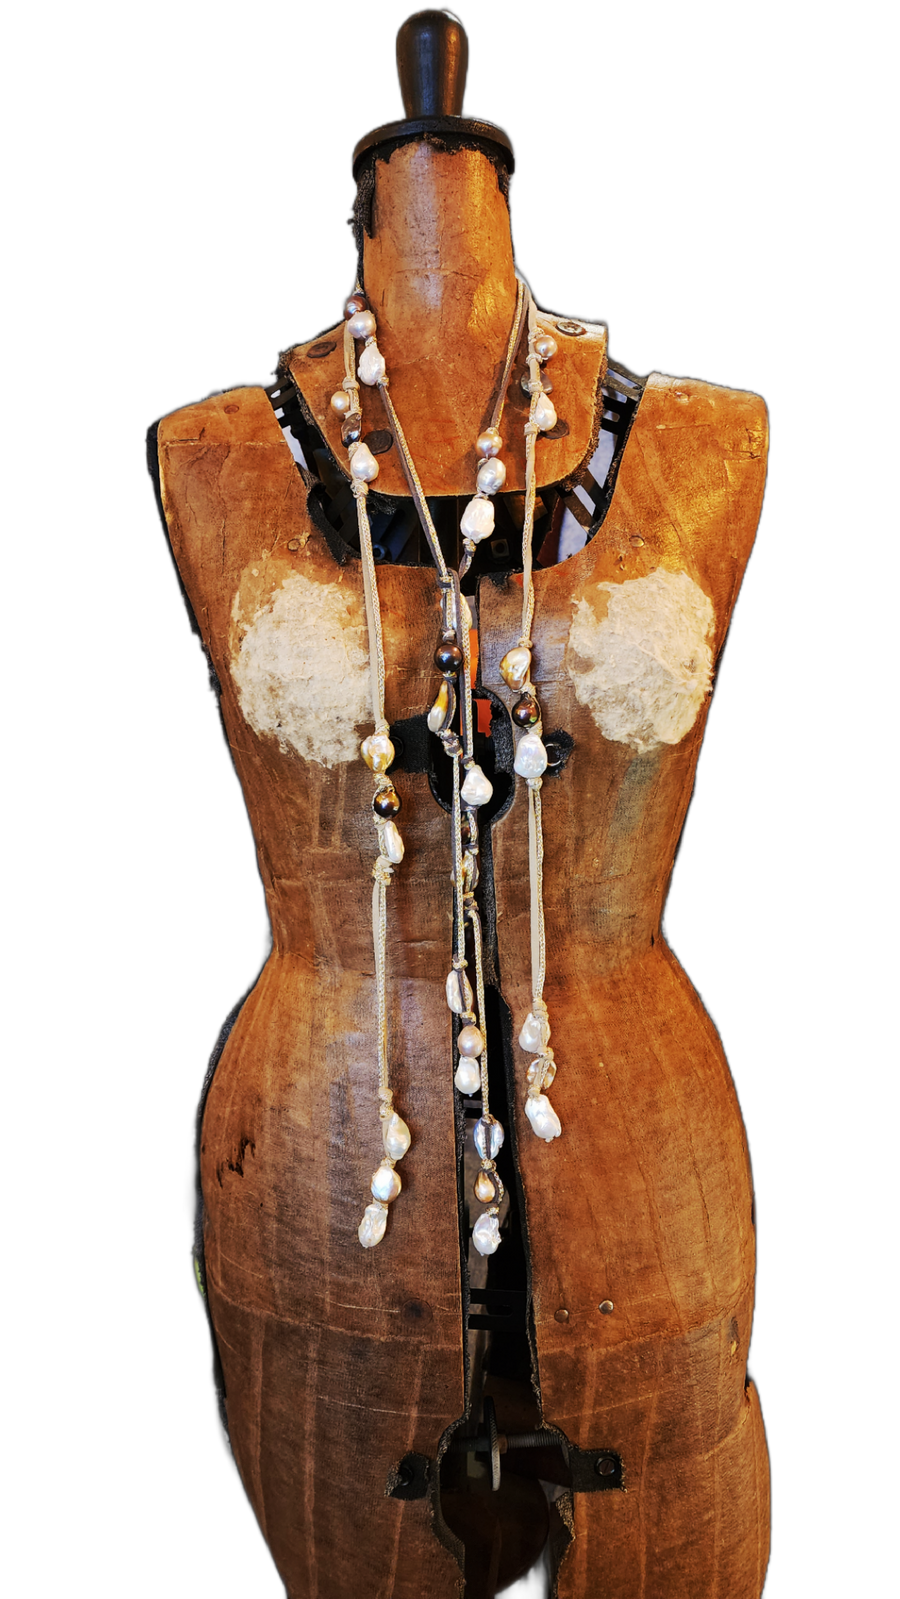 Baroque Pearls lariat style necklace - Natural Leather + metallic silk